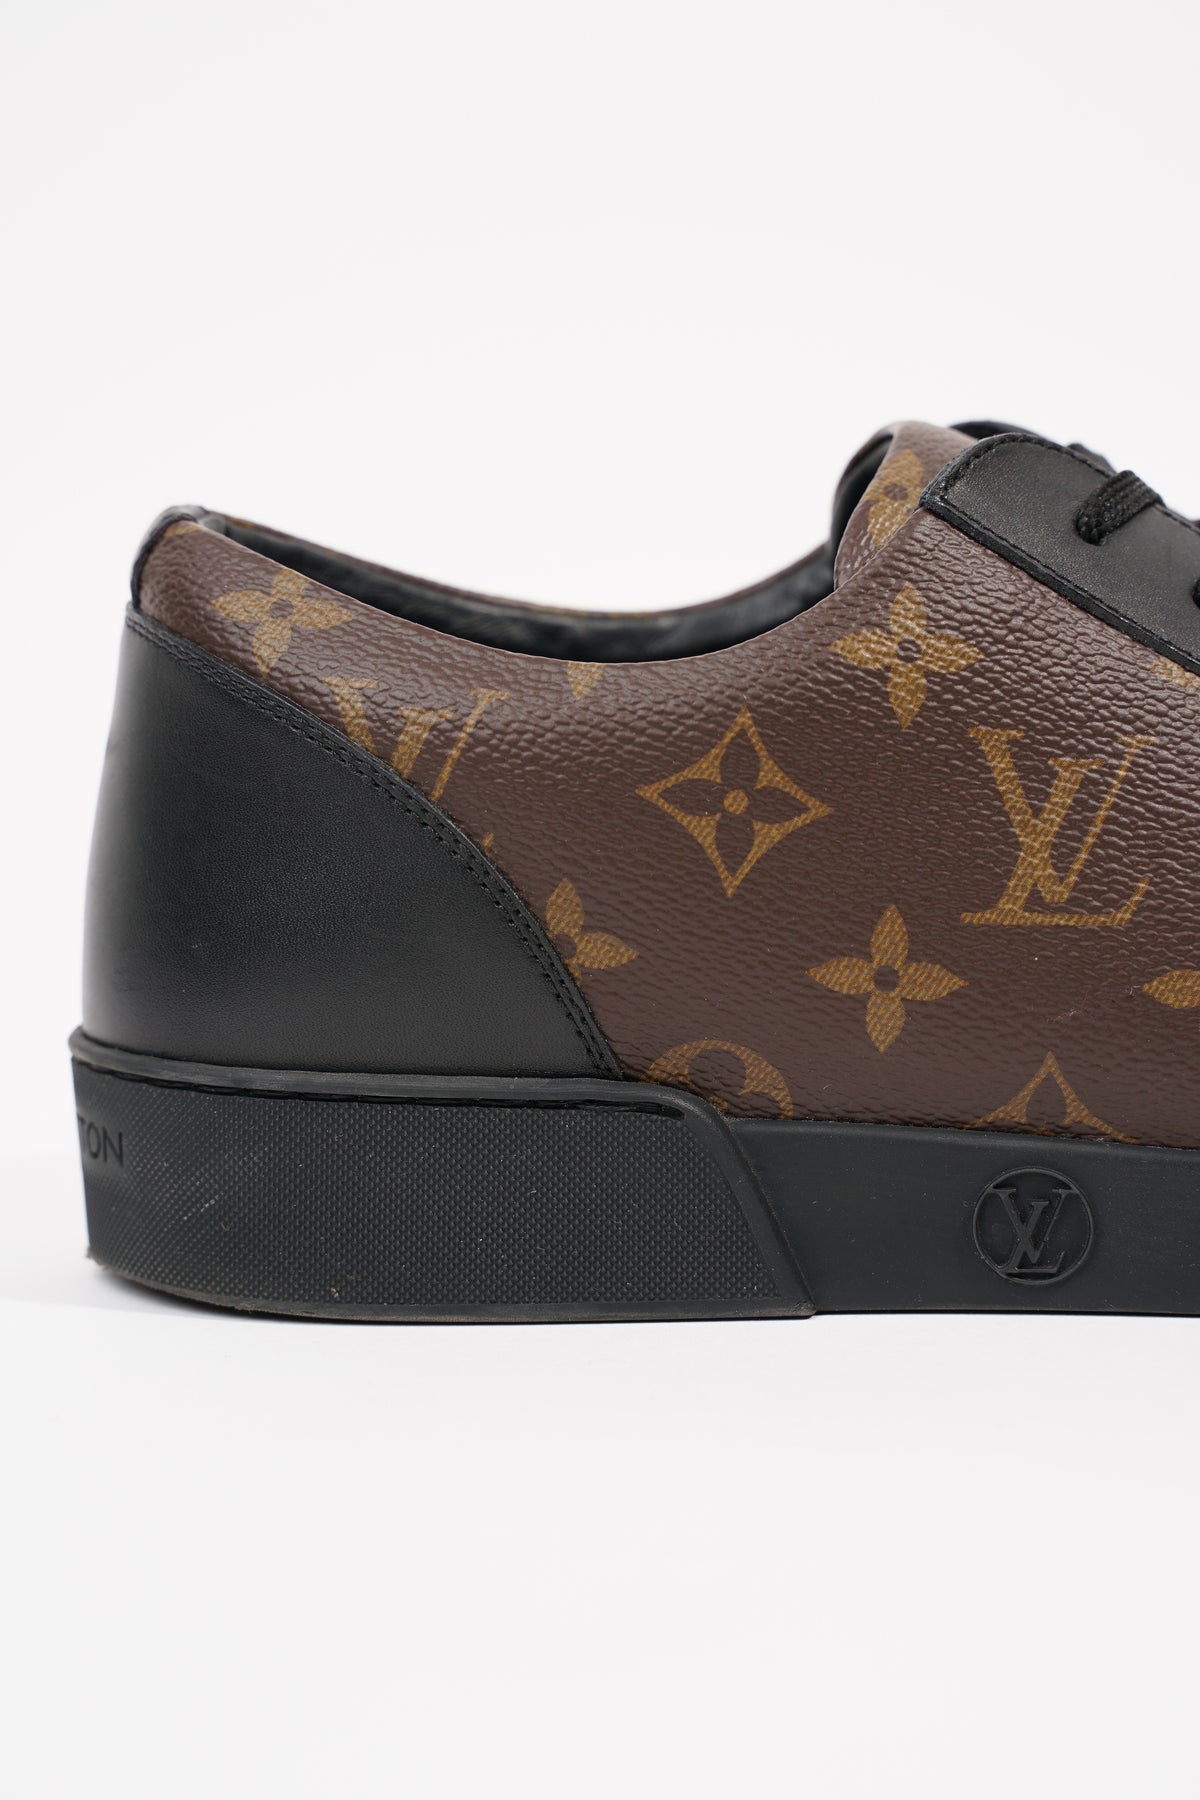 Louis Vuitton Match-up Lv Monogram Black Leather Low Top Sneakers